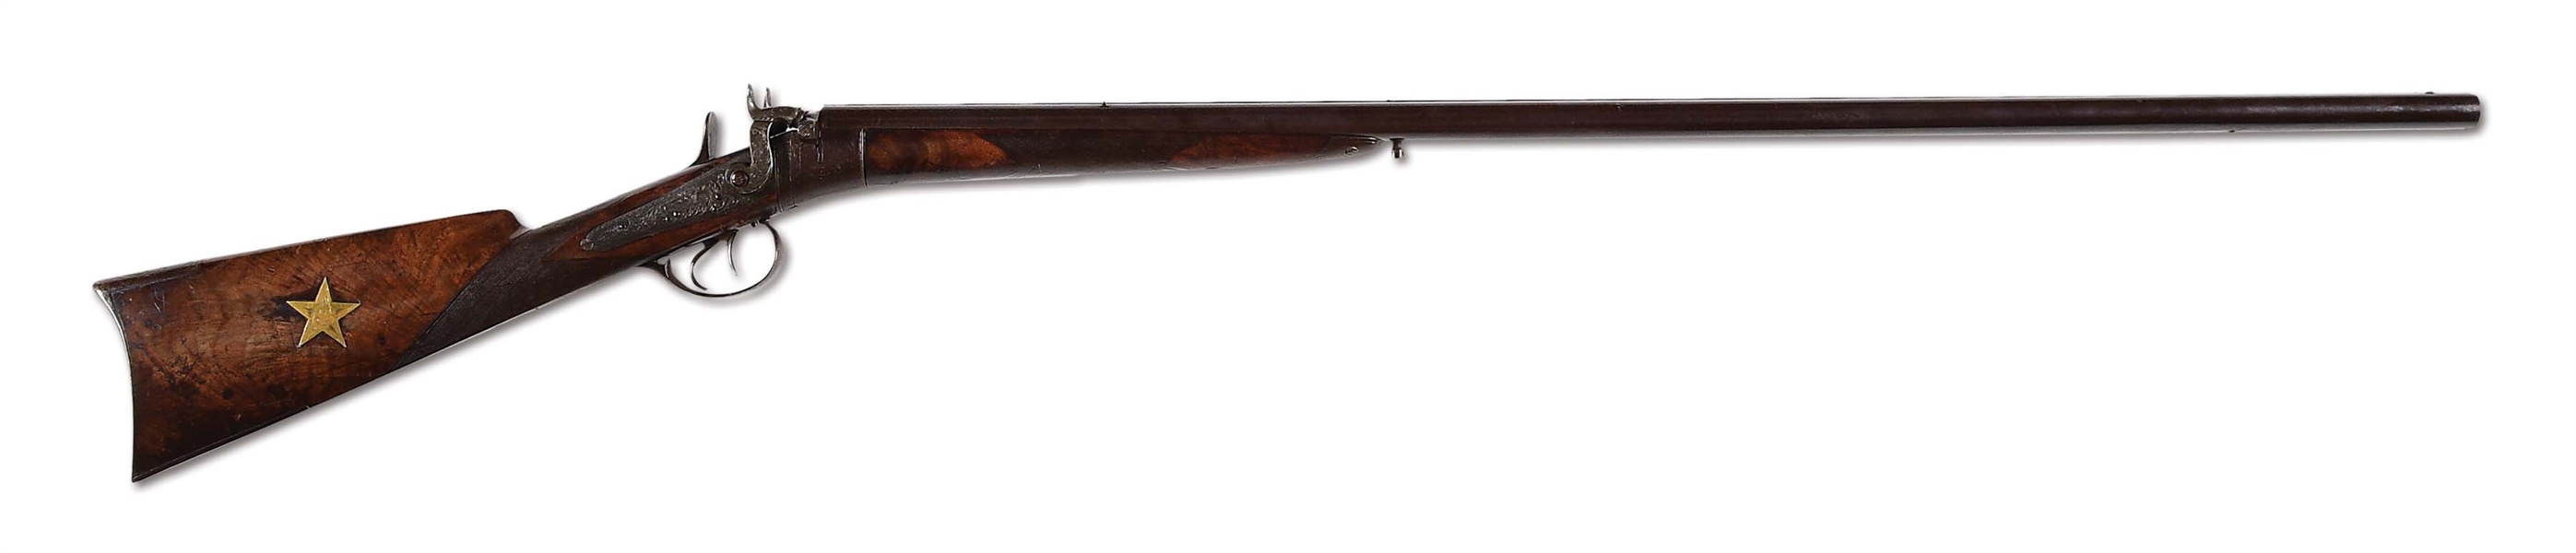 (A) AN INCREDIBLE PIECE OF TEXAS HISTORY, GENERAL THOMAS GREENS (MEMBER OF THE FAILED MIER EXPEDITION SOUTH OF THE RIO GRANDE IN 1842) SILAS DAY PATENT DOUBLE RIFLE WITH PROVENANCE. 